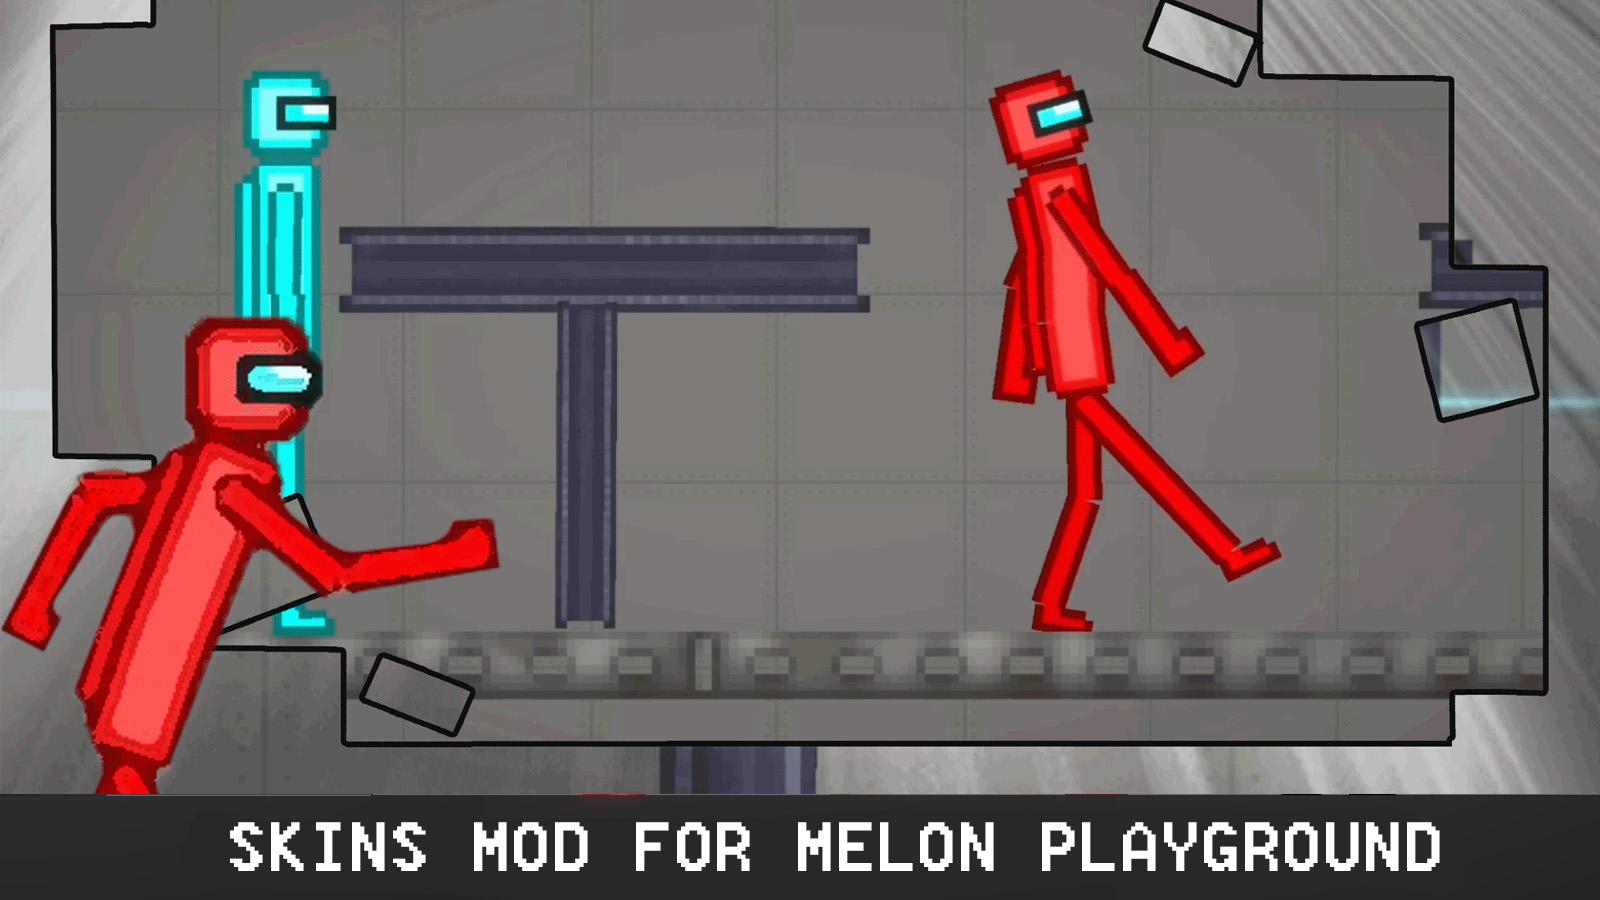 melon playground in 3d! (real) : r/peopleplayground